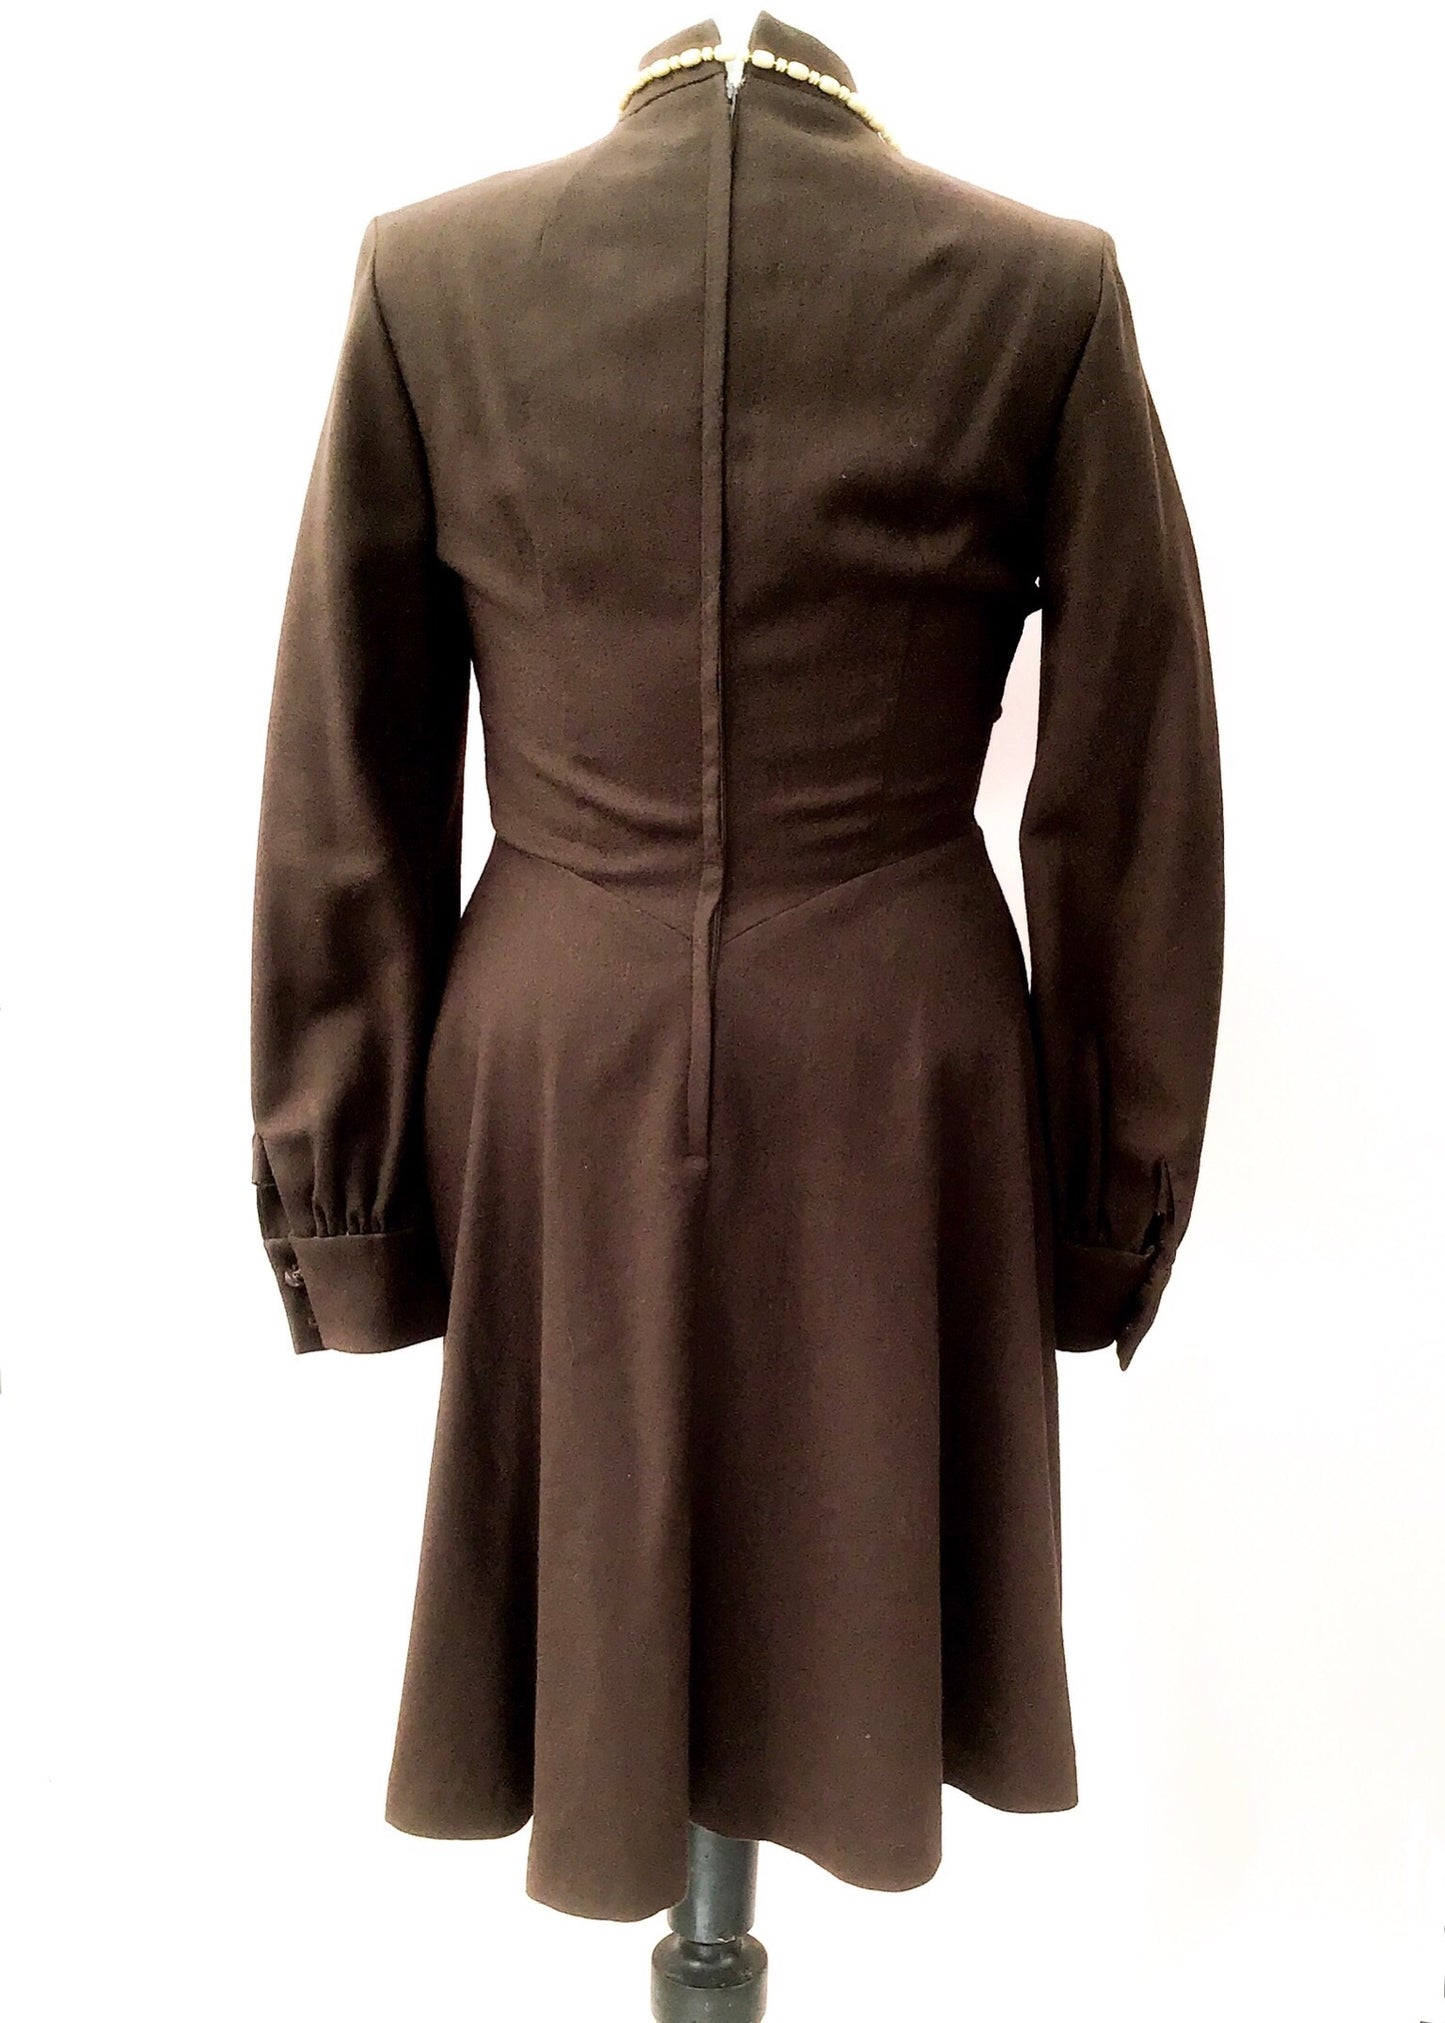 1970s Brown Worsted Fit n Flare Dress with Long Sleeves Size 14/16